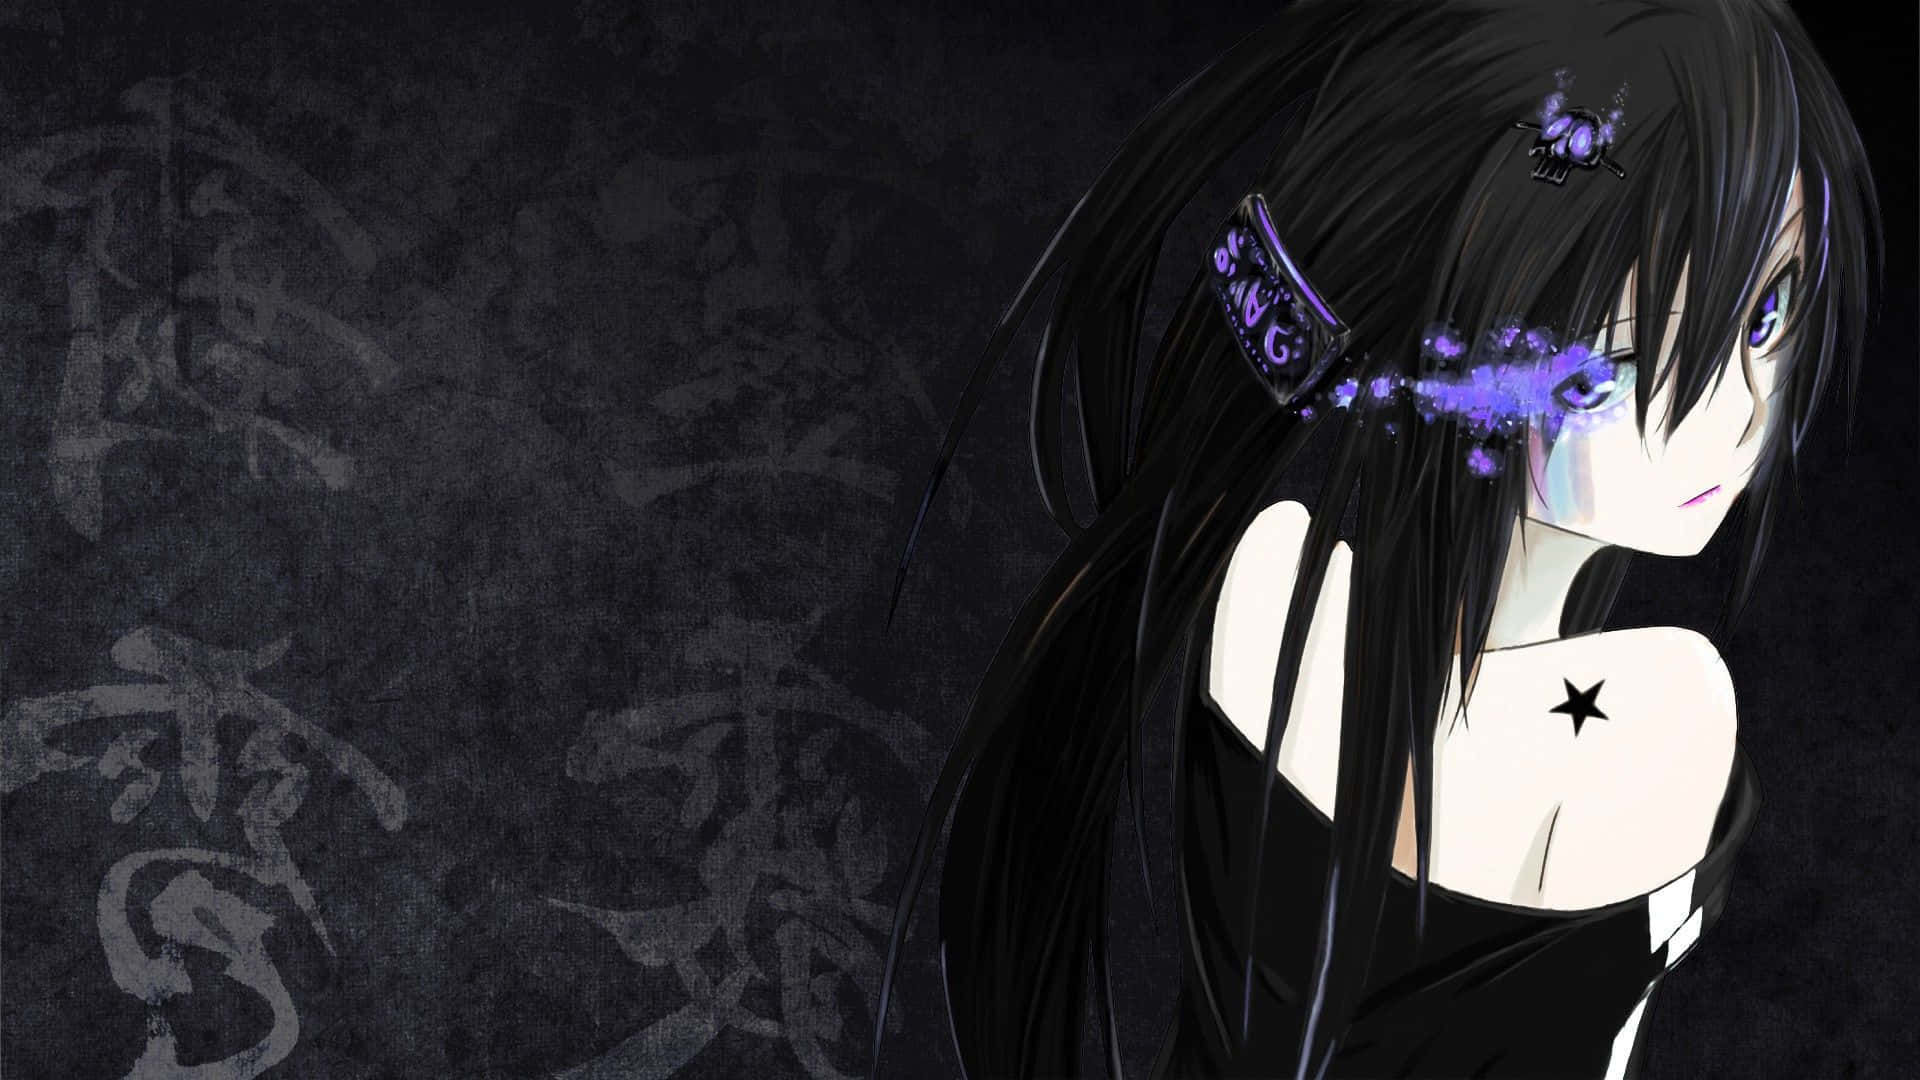 A Girl With Long Black Hair And Purple Eyes